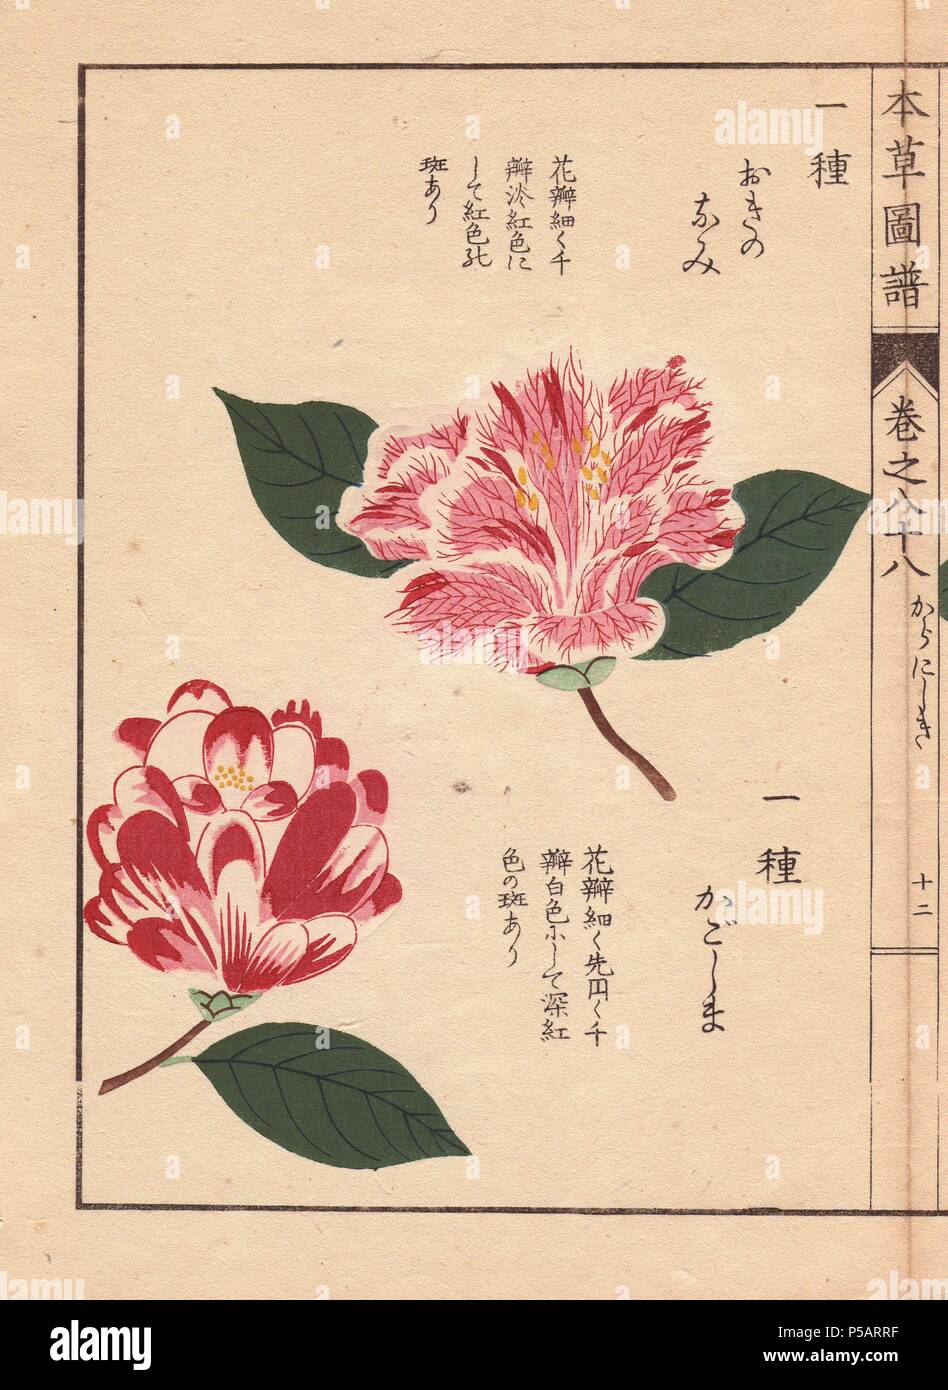 Pink and white camellias 'Okinonami' and 'Kagoshima'. . Thea japonica Nois. flore semipleno forma. . Colour-printed woodblock engraving by Kan'en Iwasaki from 'Honzo Zufu,' an Illustrated Guide to Medicinal Plants, 1884. Iwasaki (1786-1842) was a Japanese botanist, entomologist and zoologist. He was one of the first Japanese botanists to incorporate western knowledge into his studies. Stock Photo